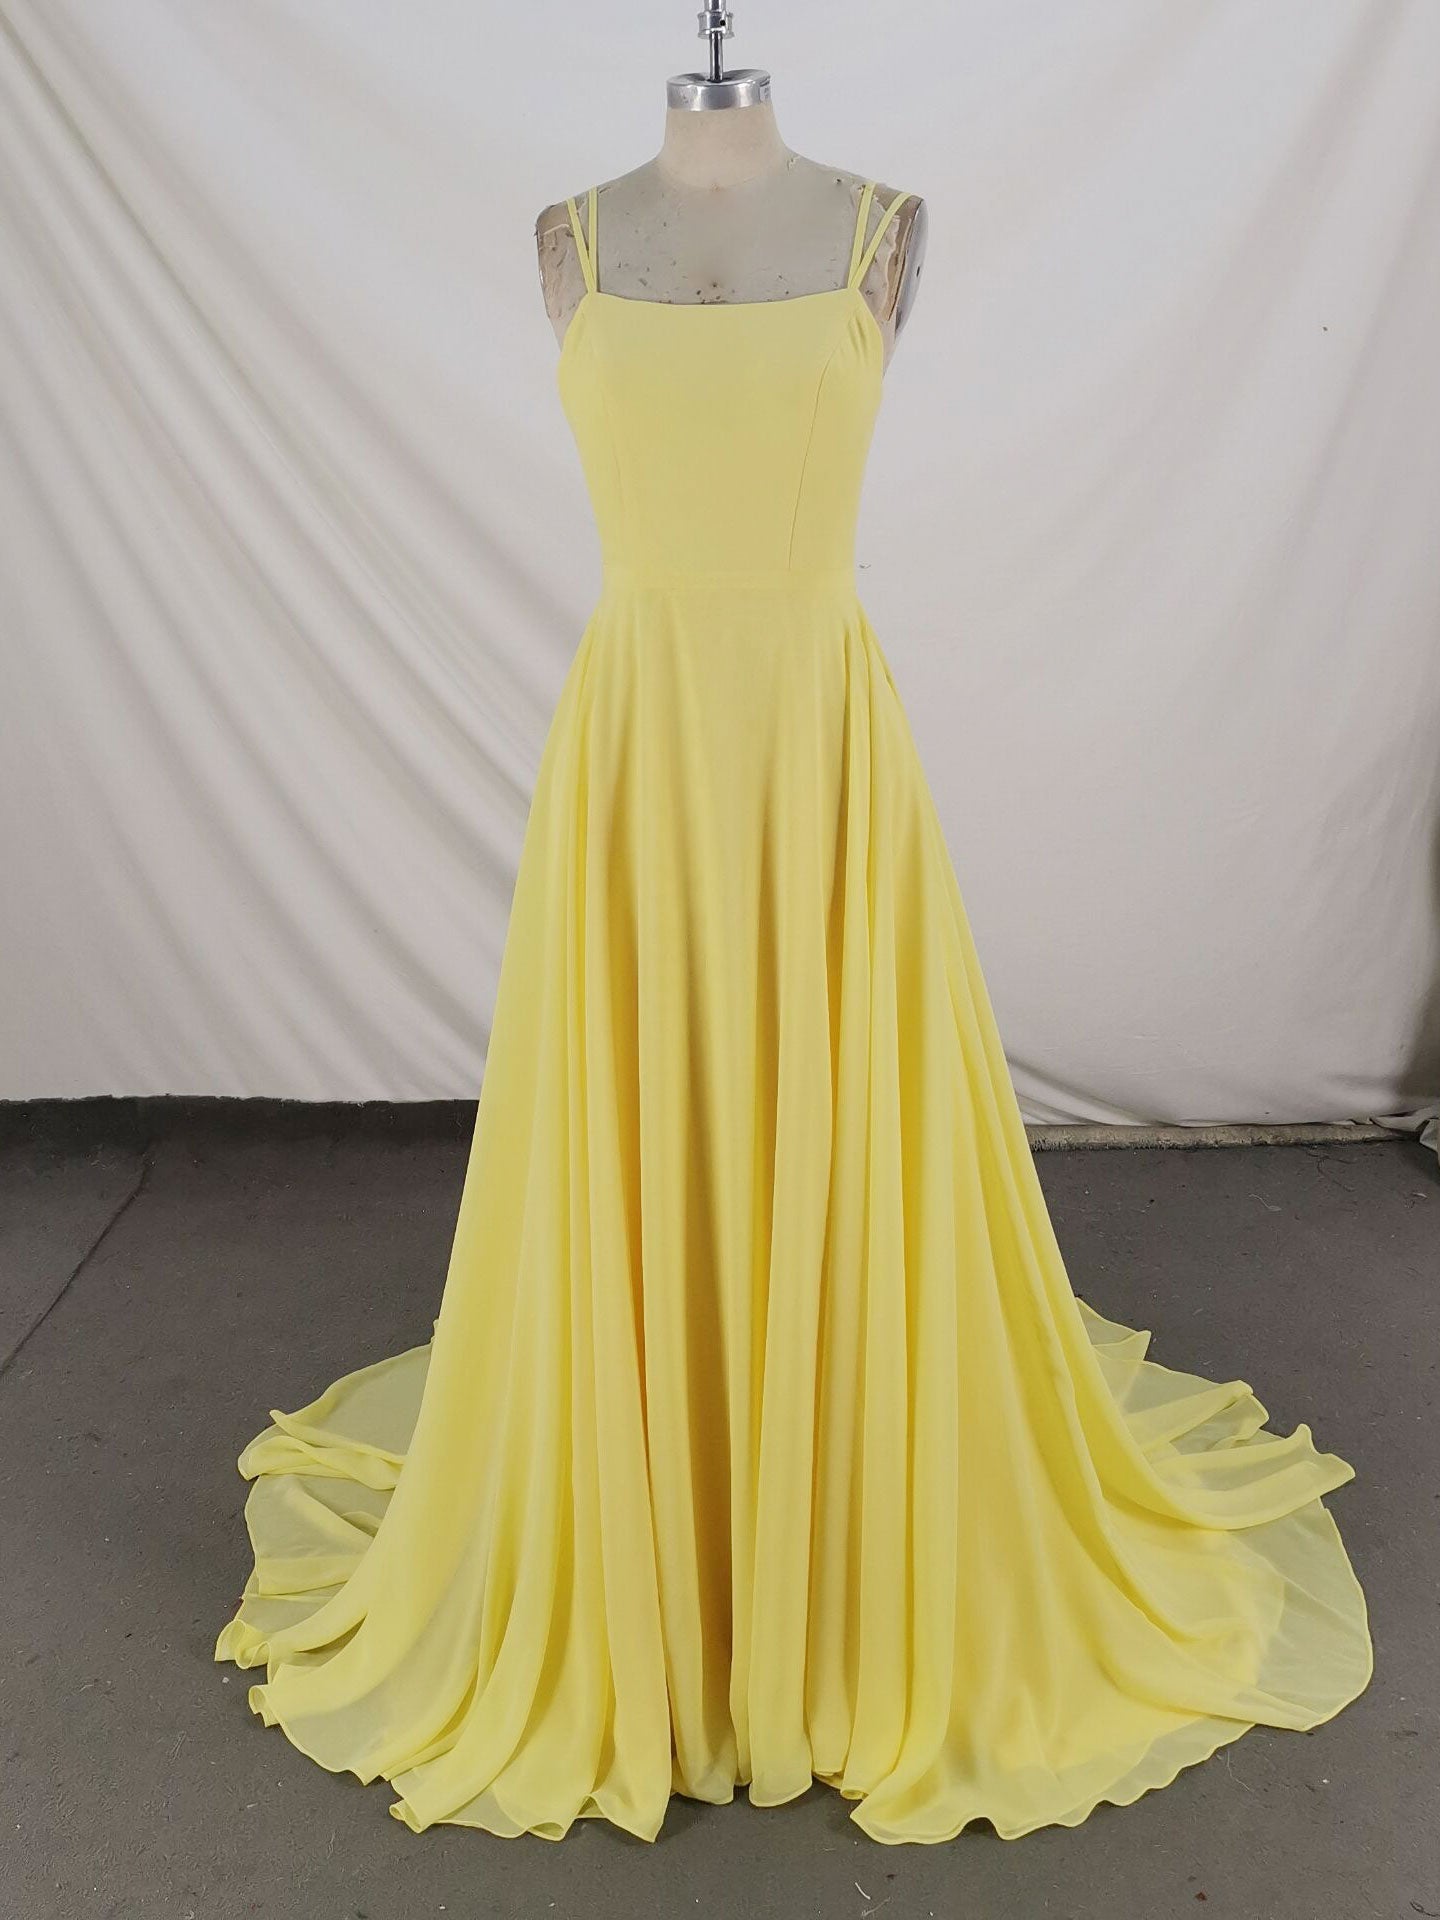 Simple Yellow Chiffon Long Corset Prom Dress Yellow Evening Dress outfit, Homecoming Dresses Baby Blue